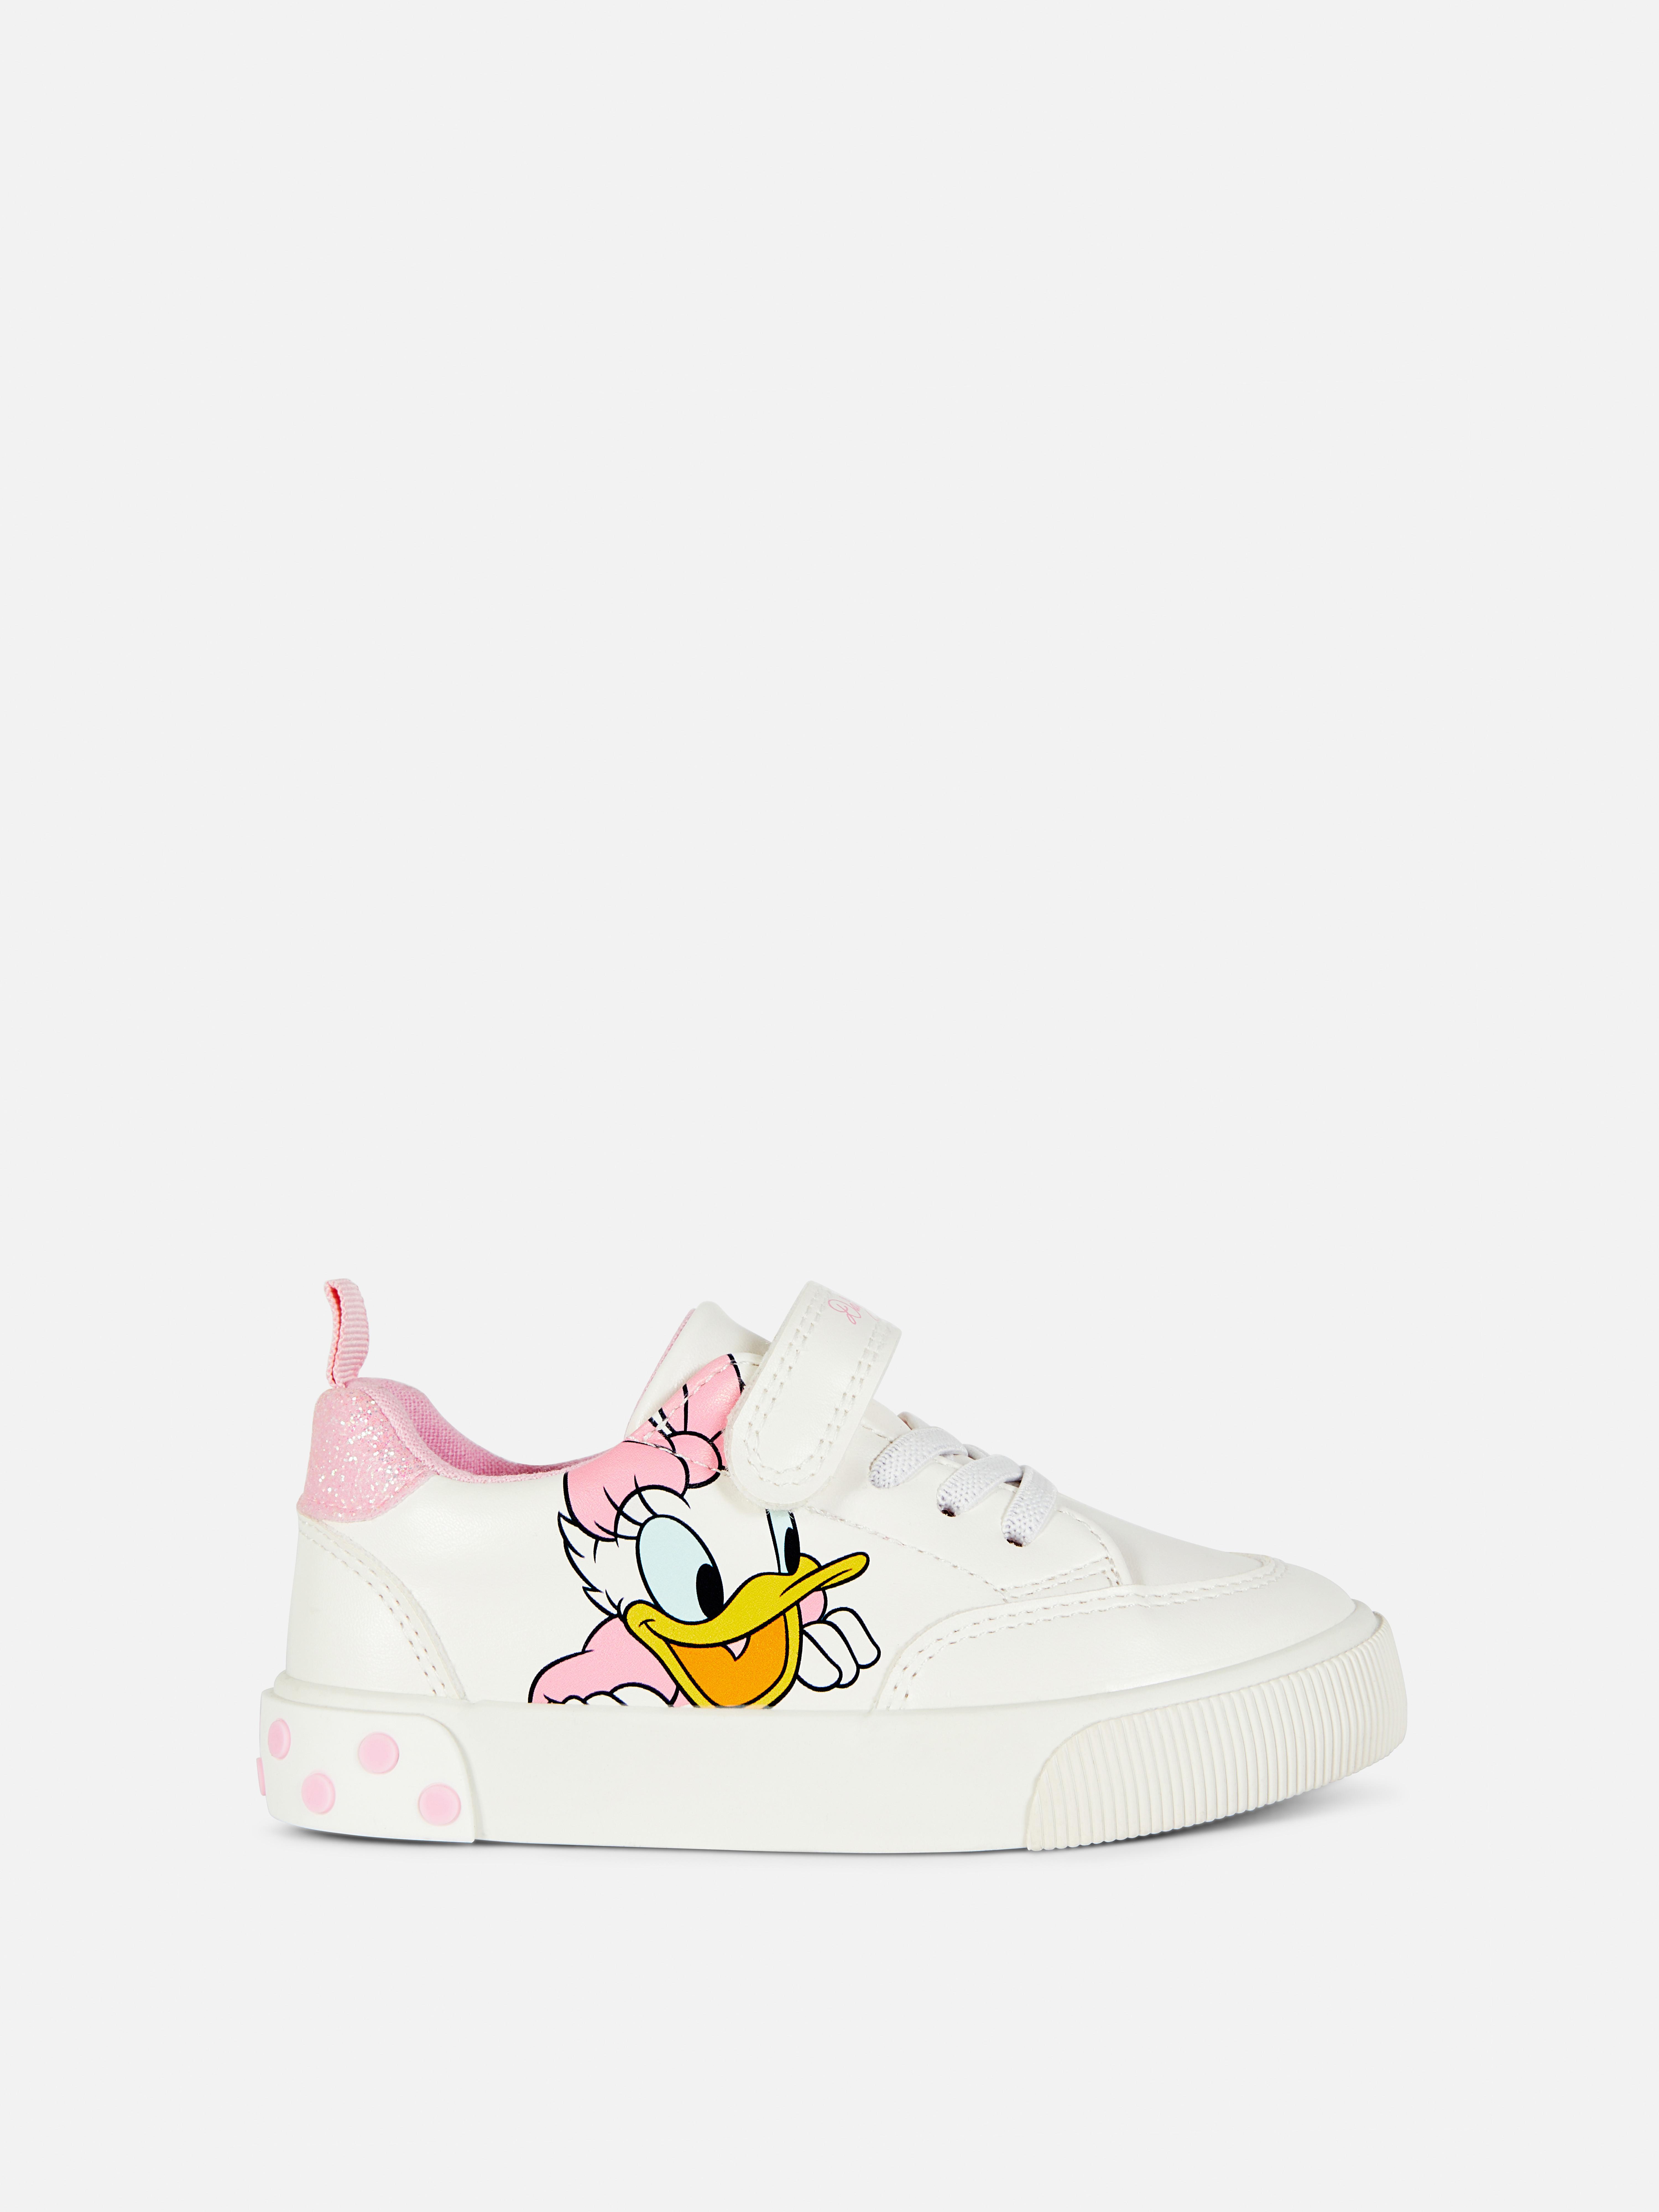 Disney’s Minnie Mouse and Daisy Duck Trainers